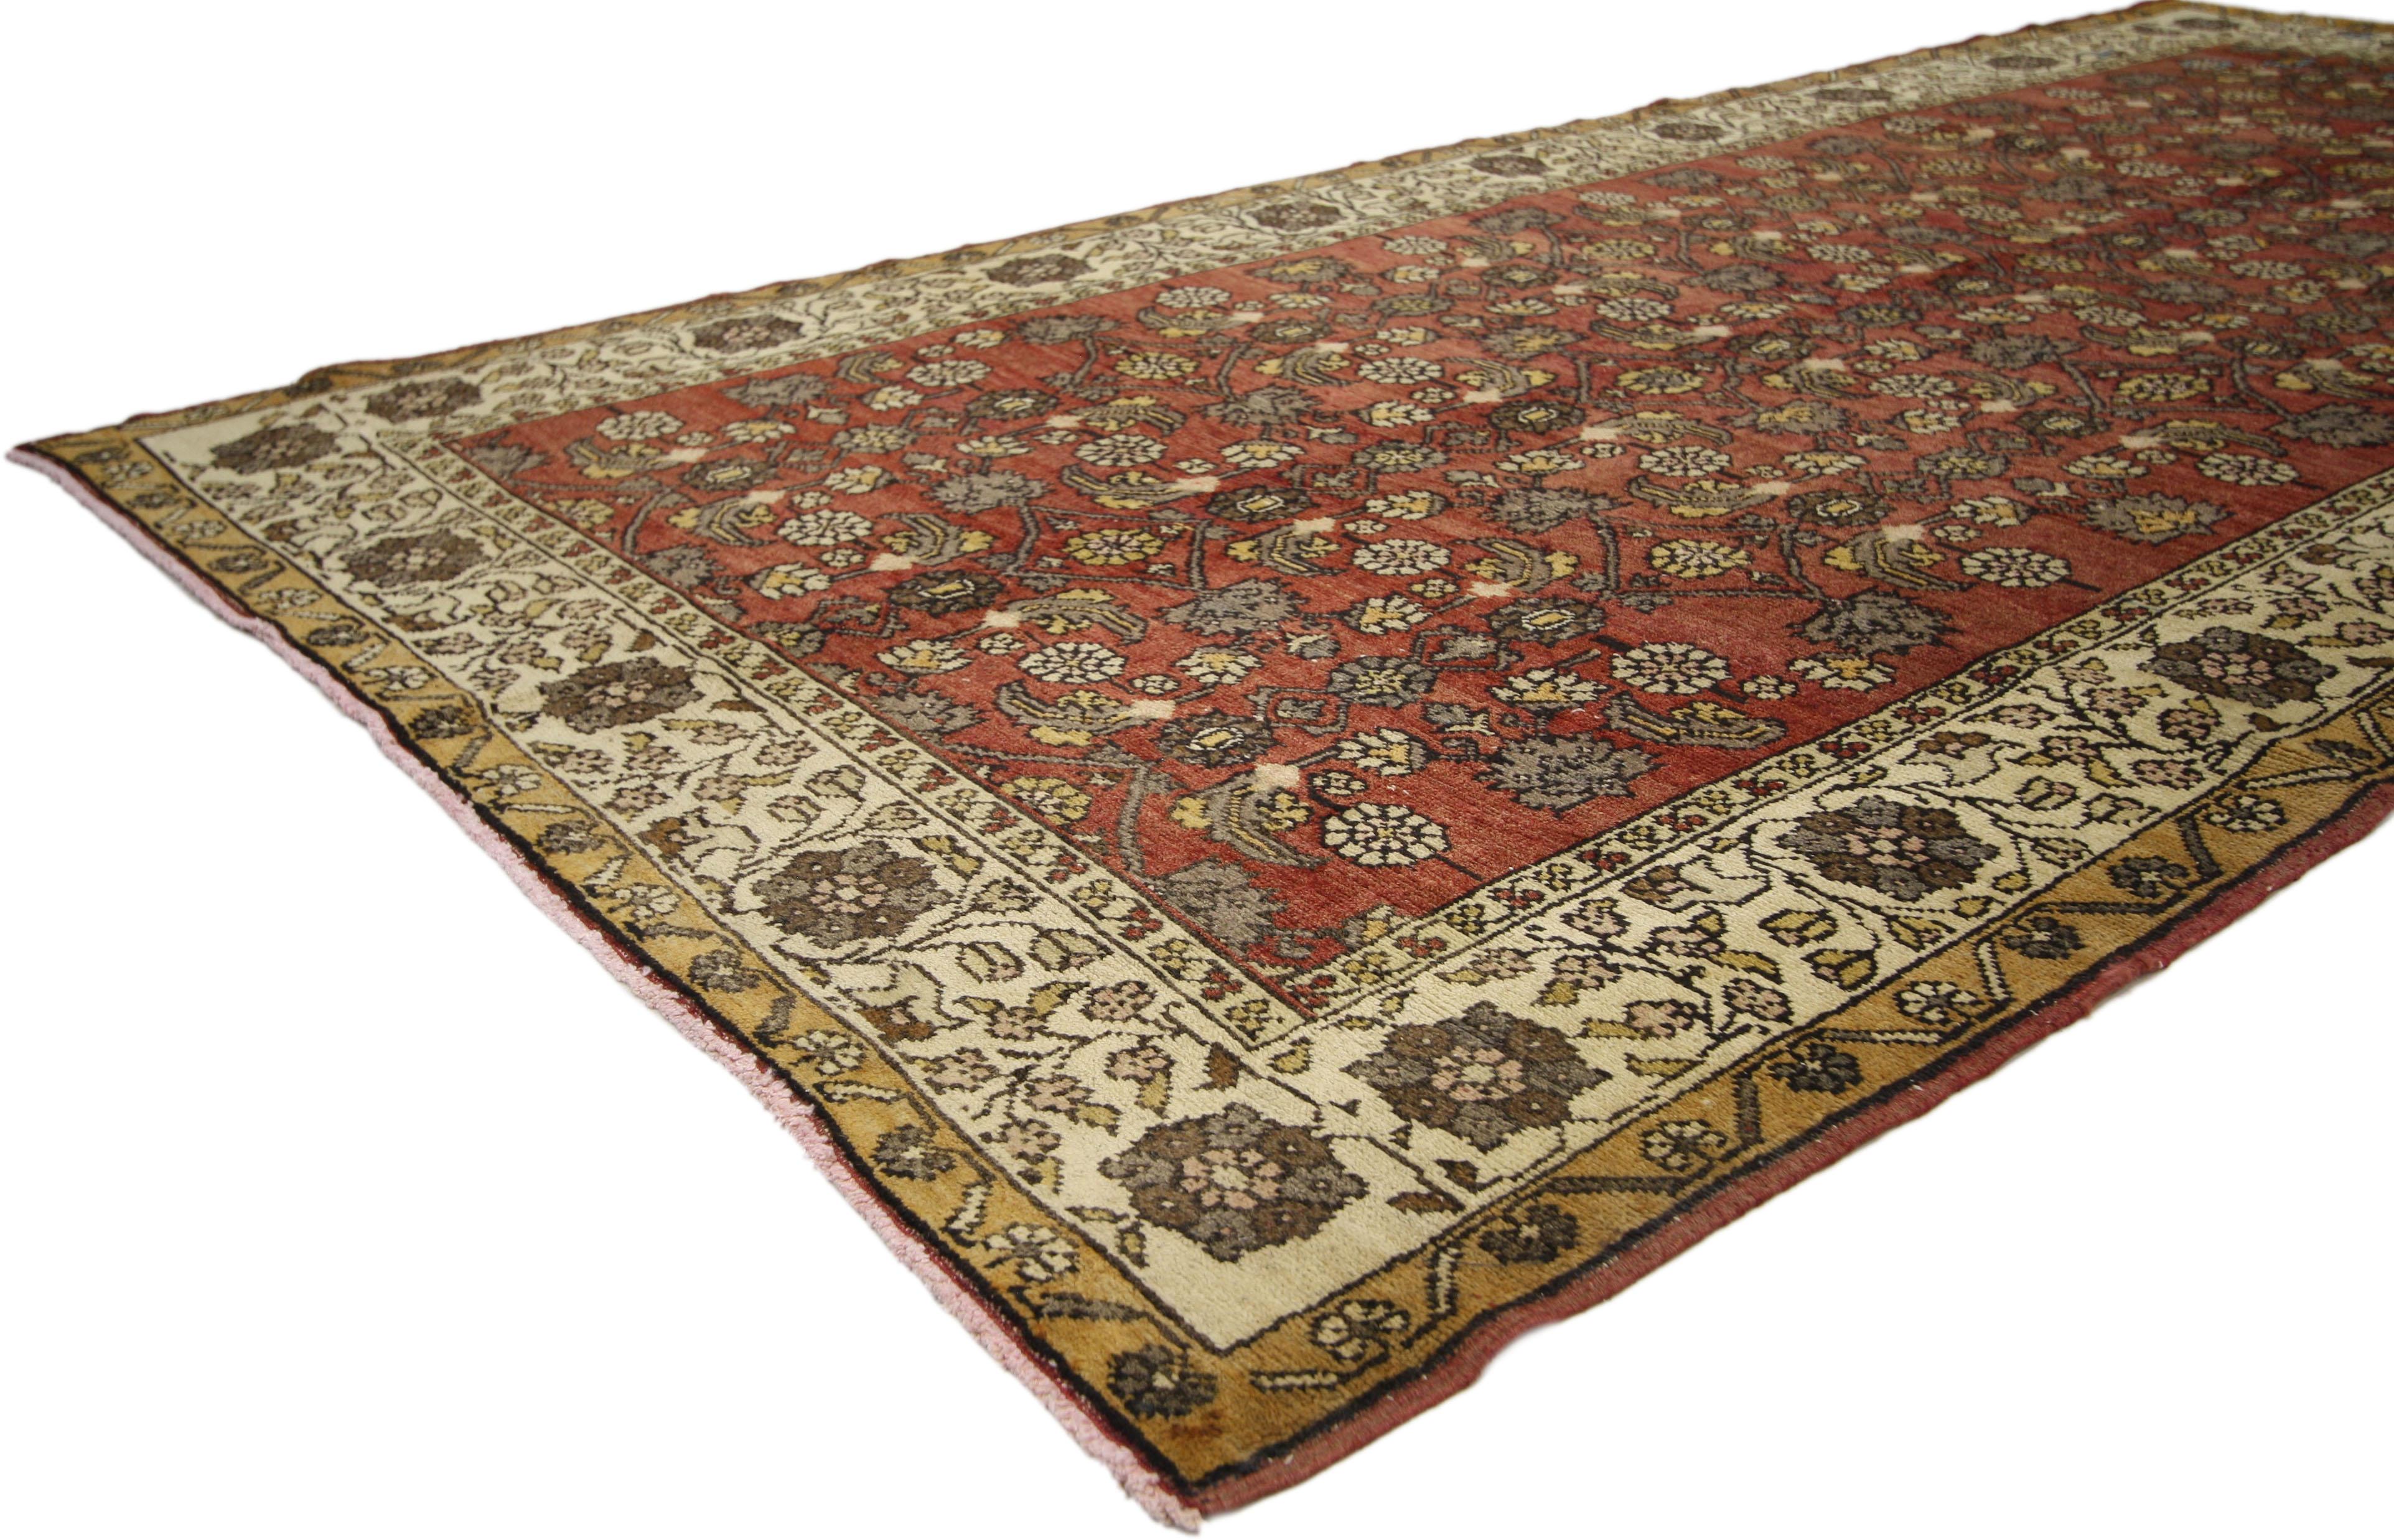 50410, vintage Turkish Sivas rug with Modern Traditional style. This hand-knotted wool vintage Turkish Sivas rug features an elaborate all-over Herati pattern floating on an abrashed red field surrounded by a beige border composed of intertwining